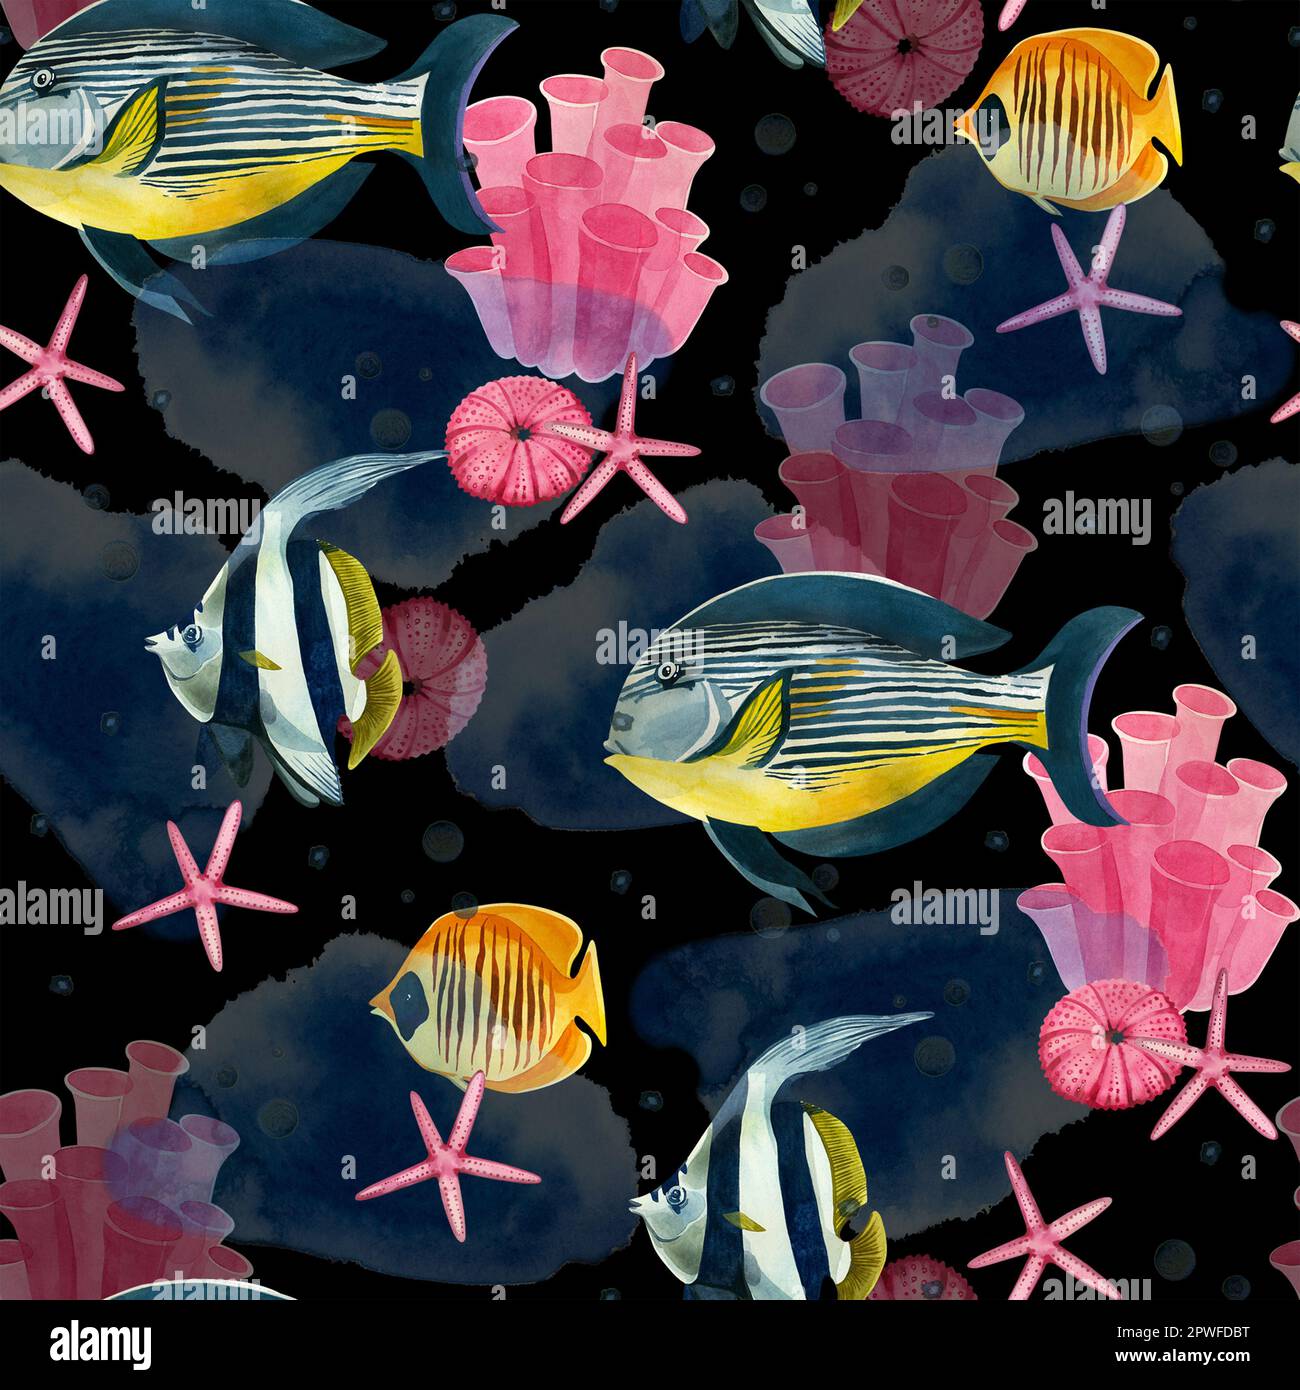 Seamless pattern. Tropical fishes of bright colors, pink stars, corals and blue spots, hand-drawn in watercolor on a dark background. Stock Photo